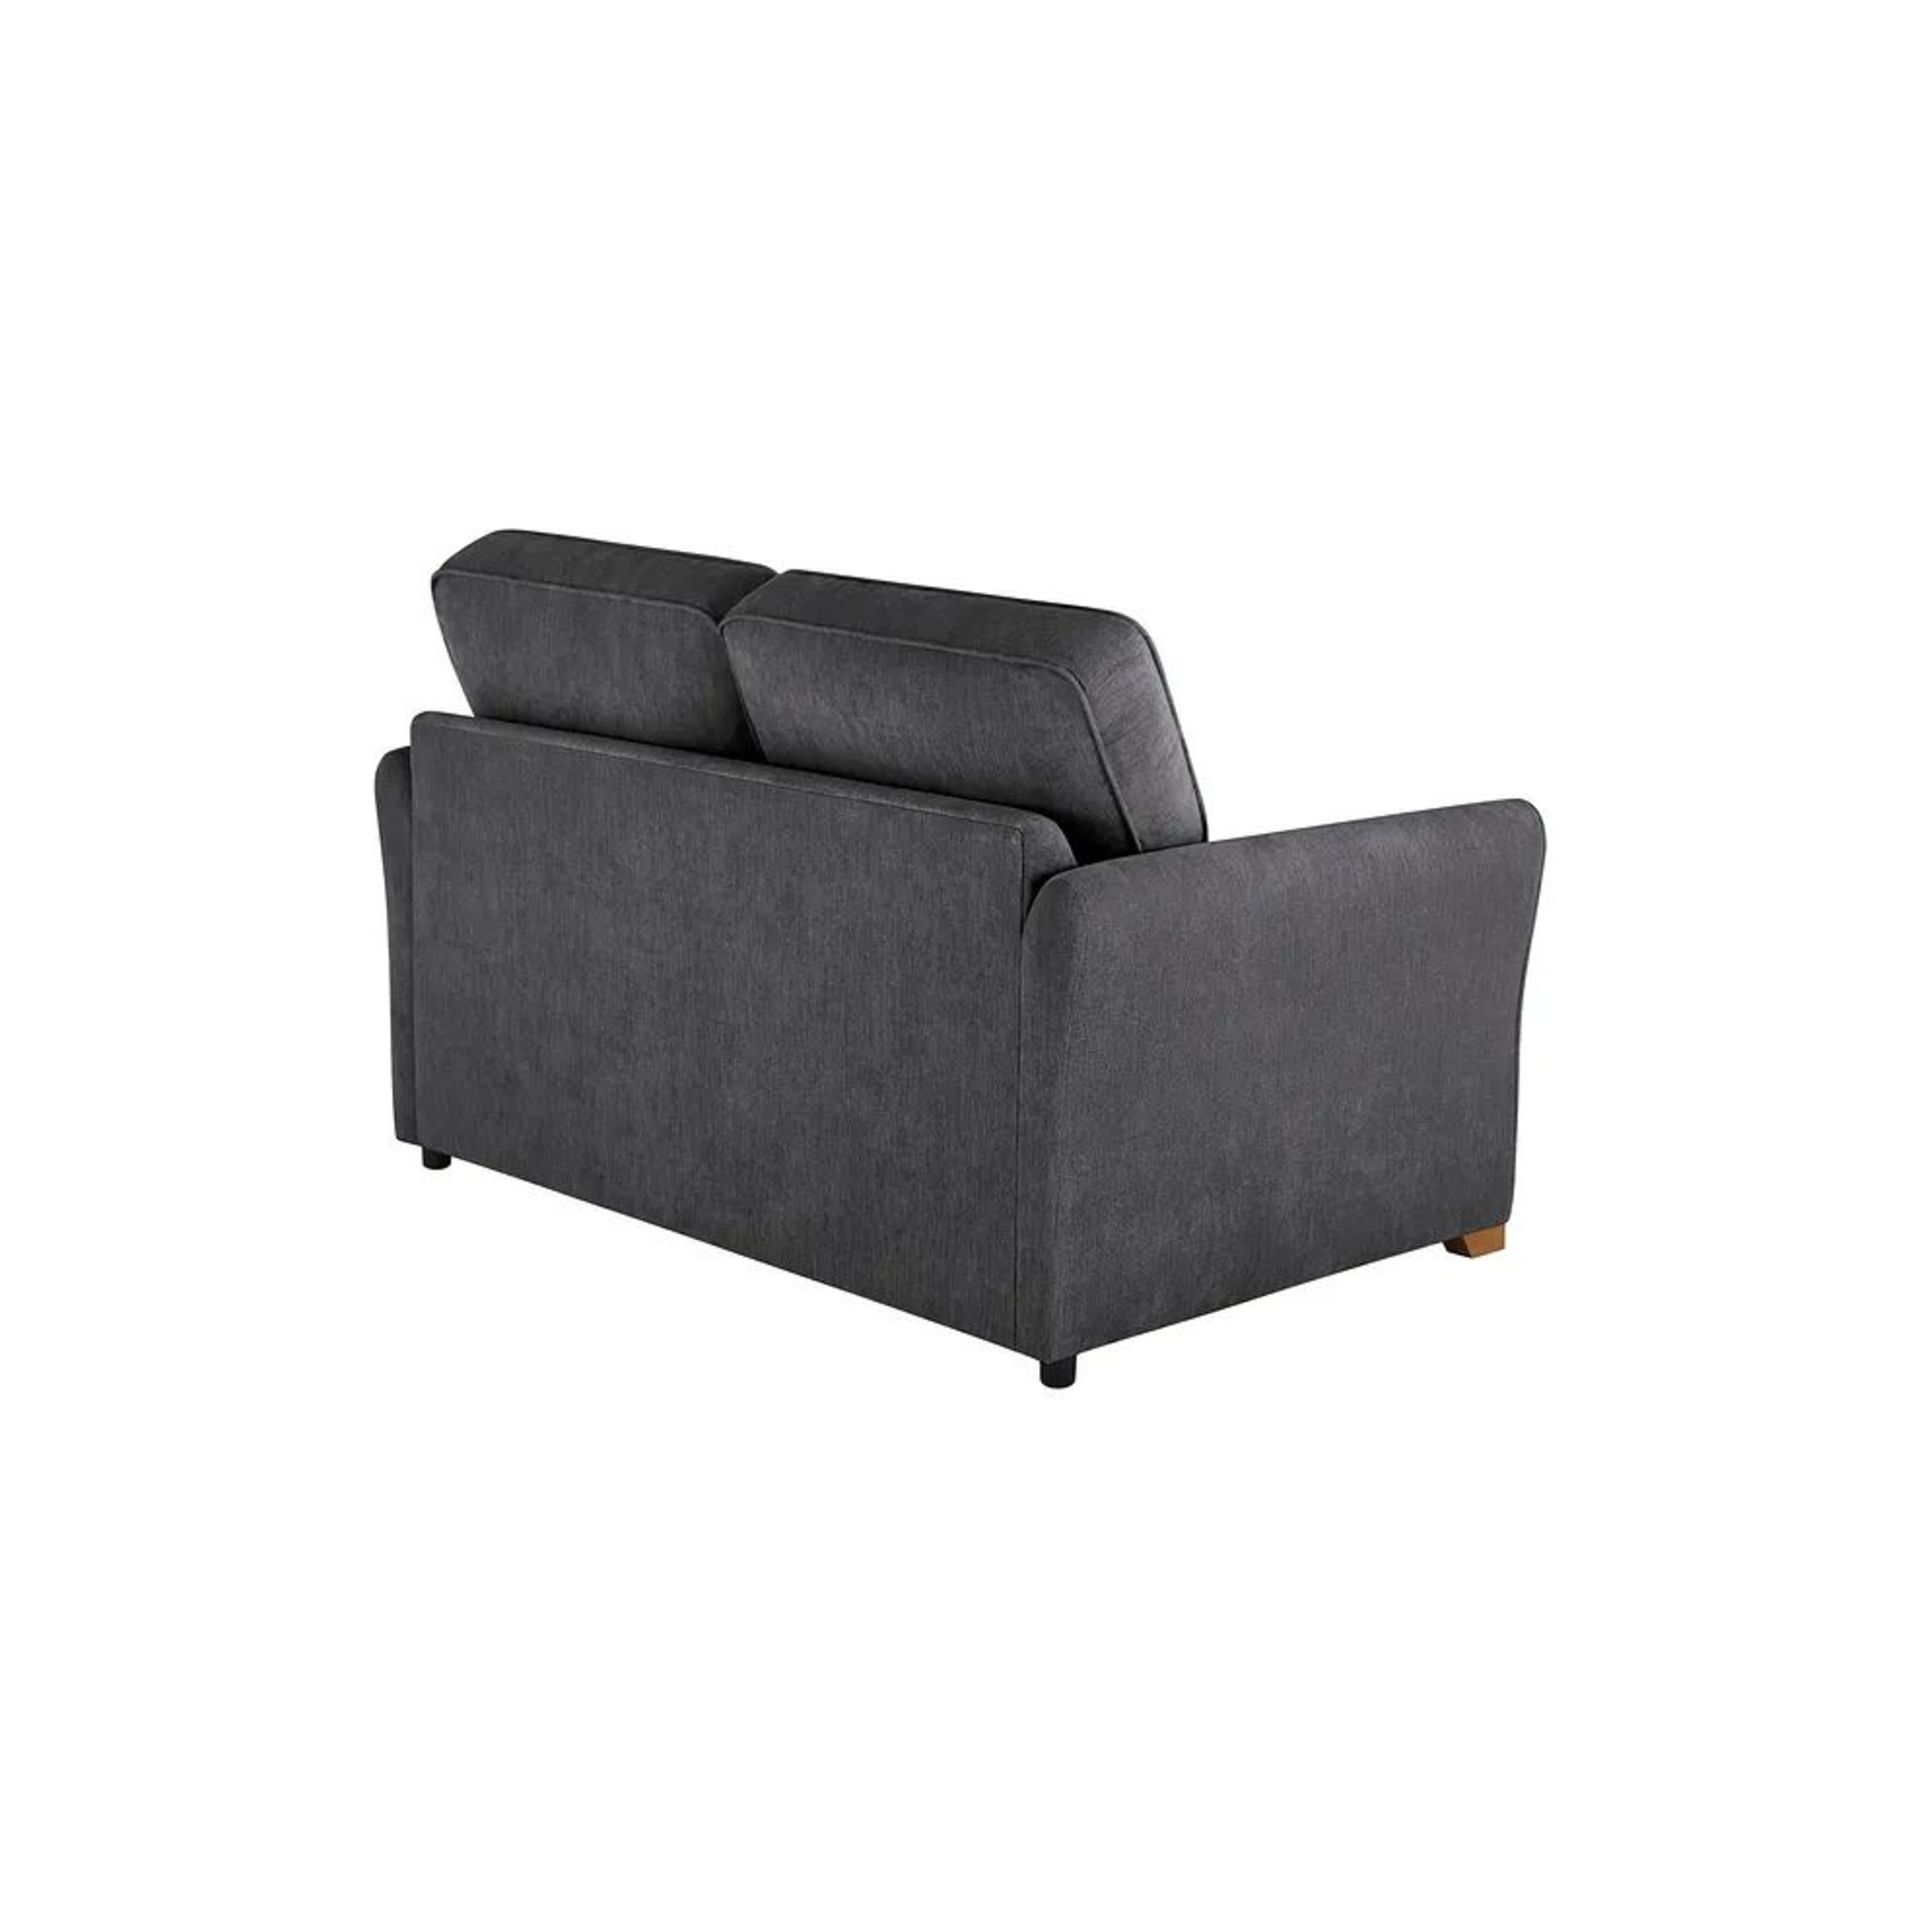 BRAND NEW JASMINE 2 Seater Sofa Bed - CAMPO PEWTER FABRIC. RRP £1099. Create a modern, multi-purpose - Image 4 of 12